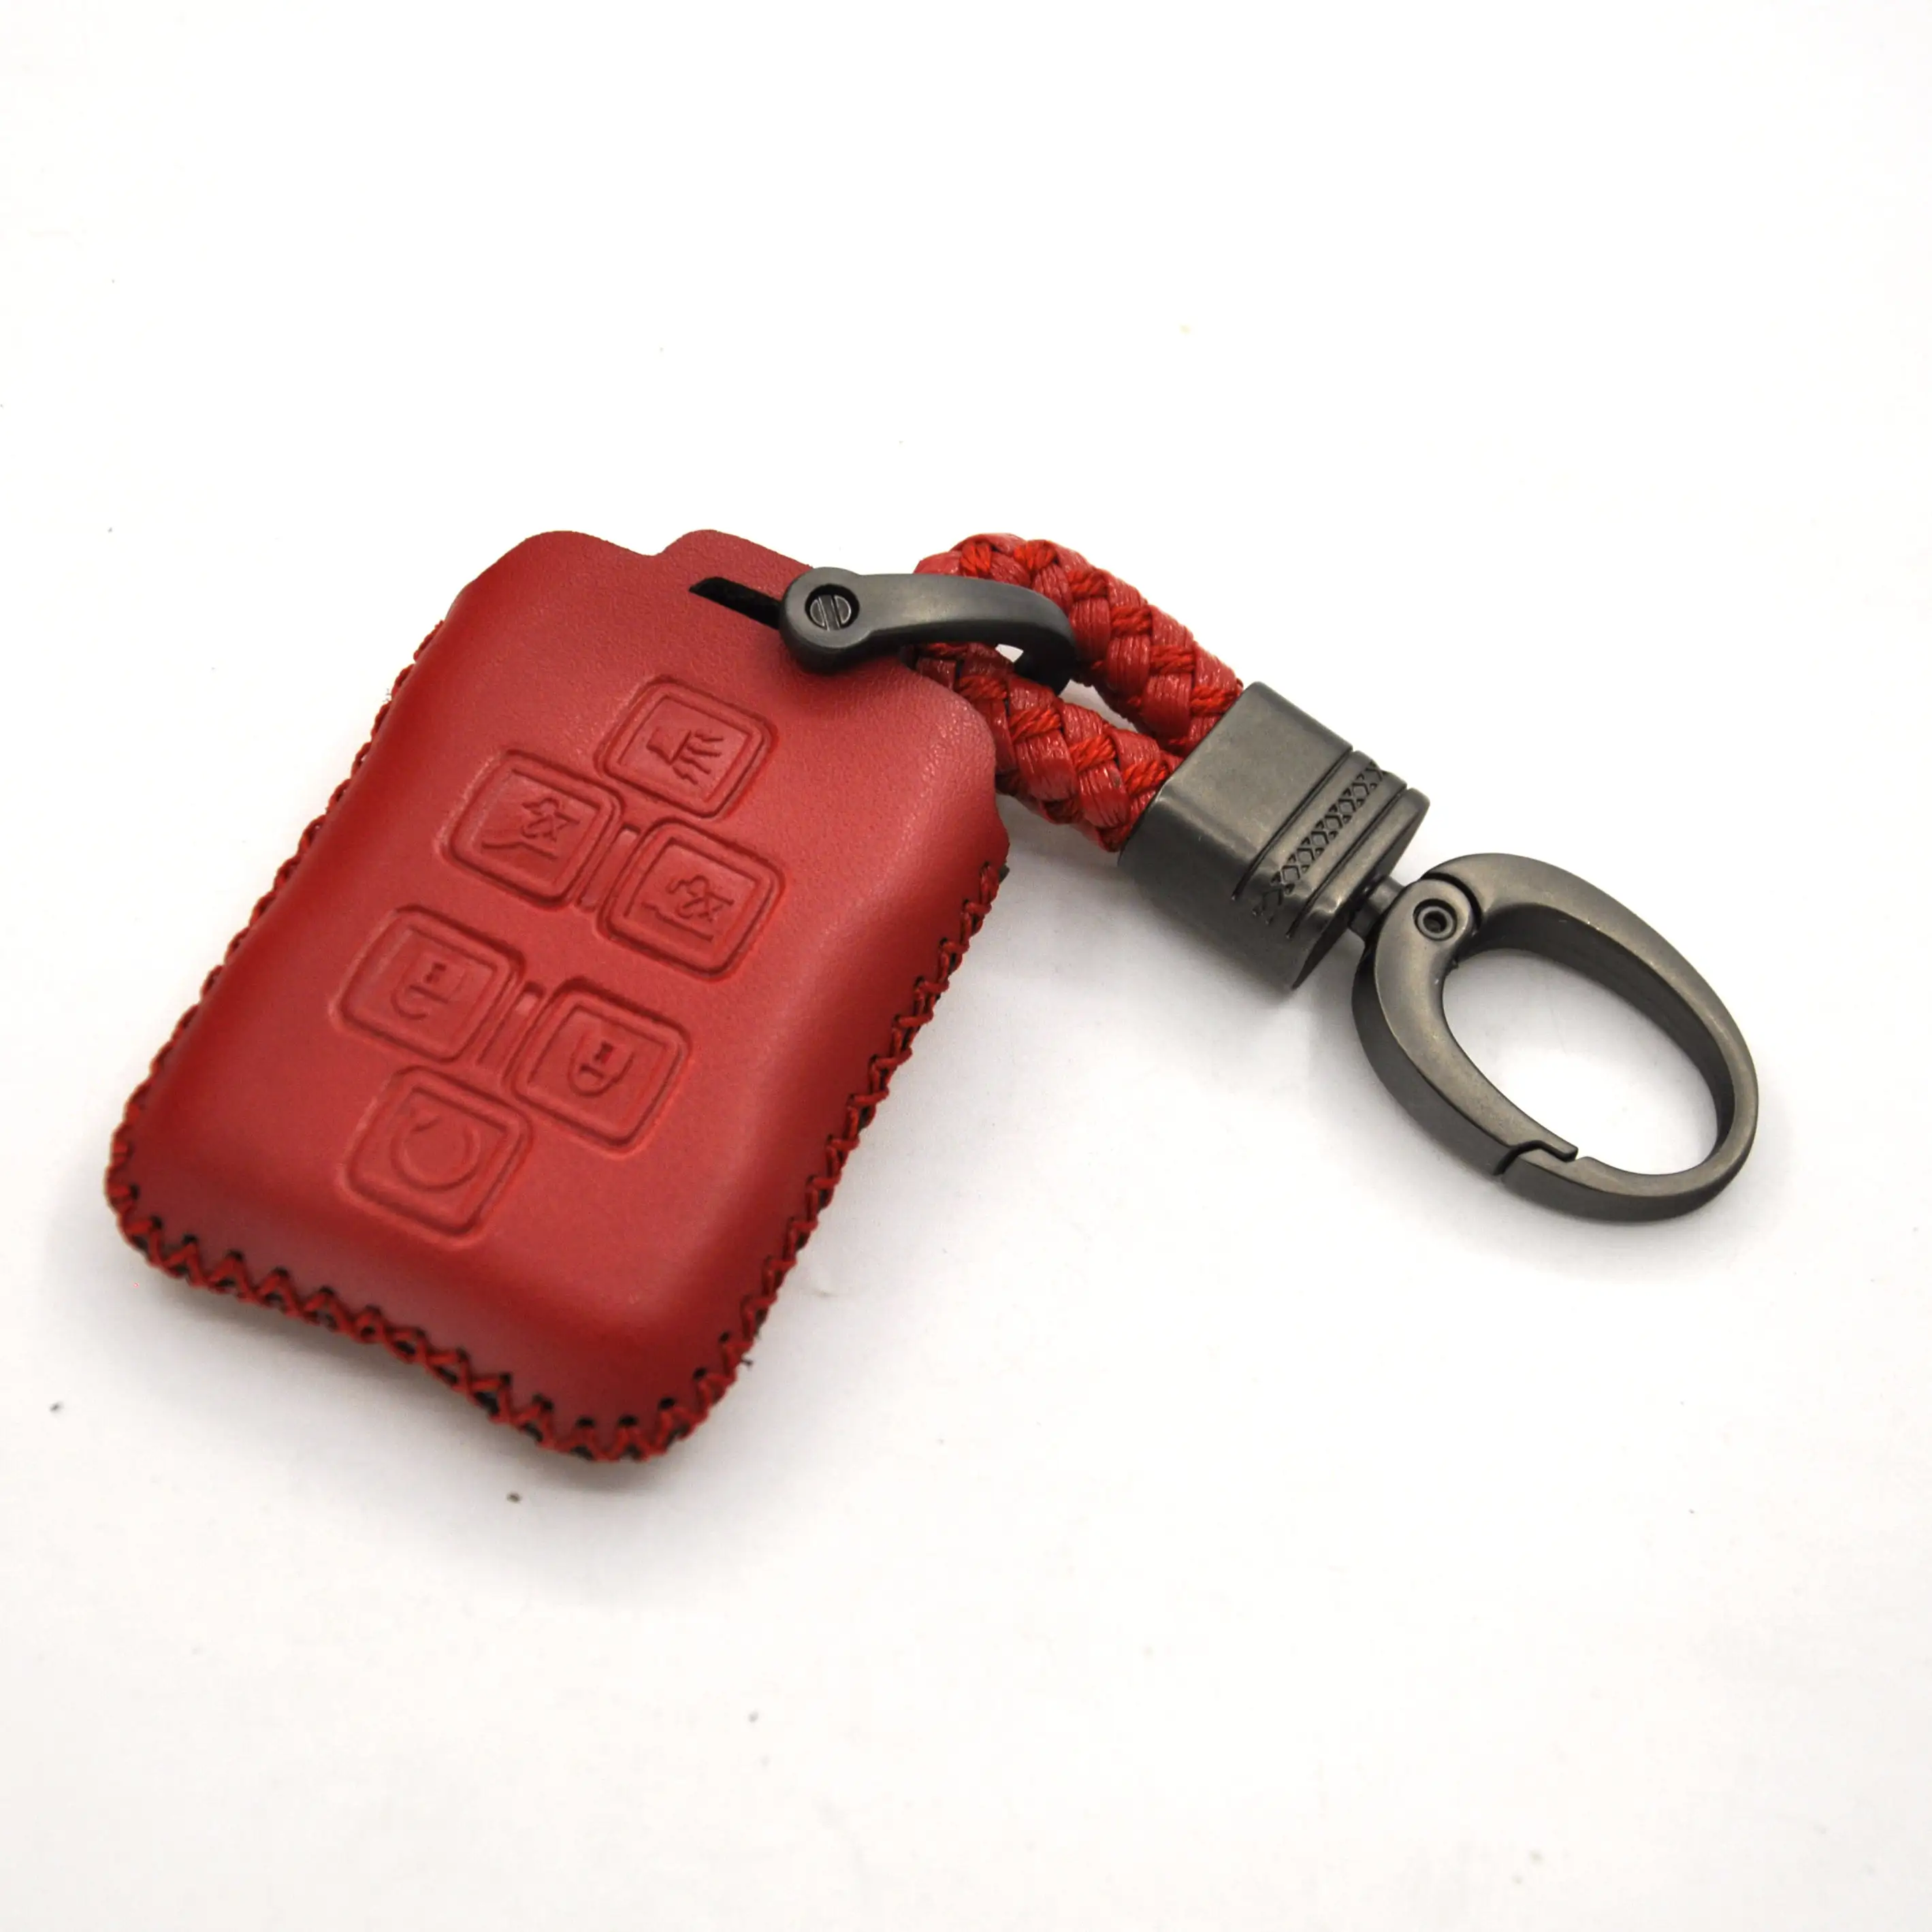 Genuine Leather Smart Car Key Keyless Remote Entry Fob Case Cover with Key Chain for GMC Sierra Canyon Chevy Silverado 1500